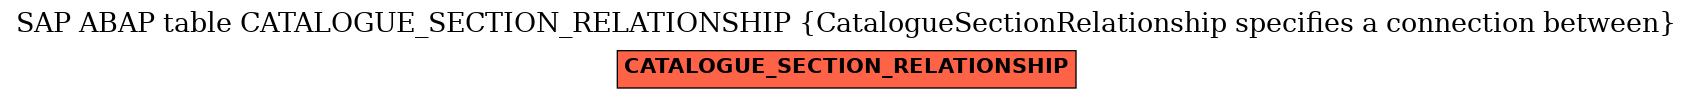 E-R Diagram for table CATALOGUE_SECTION_RELATIONSHIP (CatalogueSectionRelationship specifies a connection between)